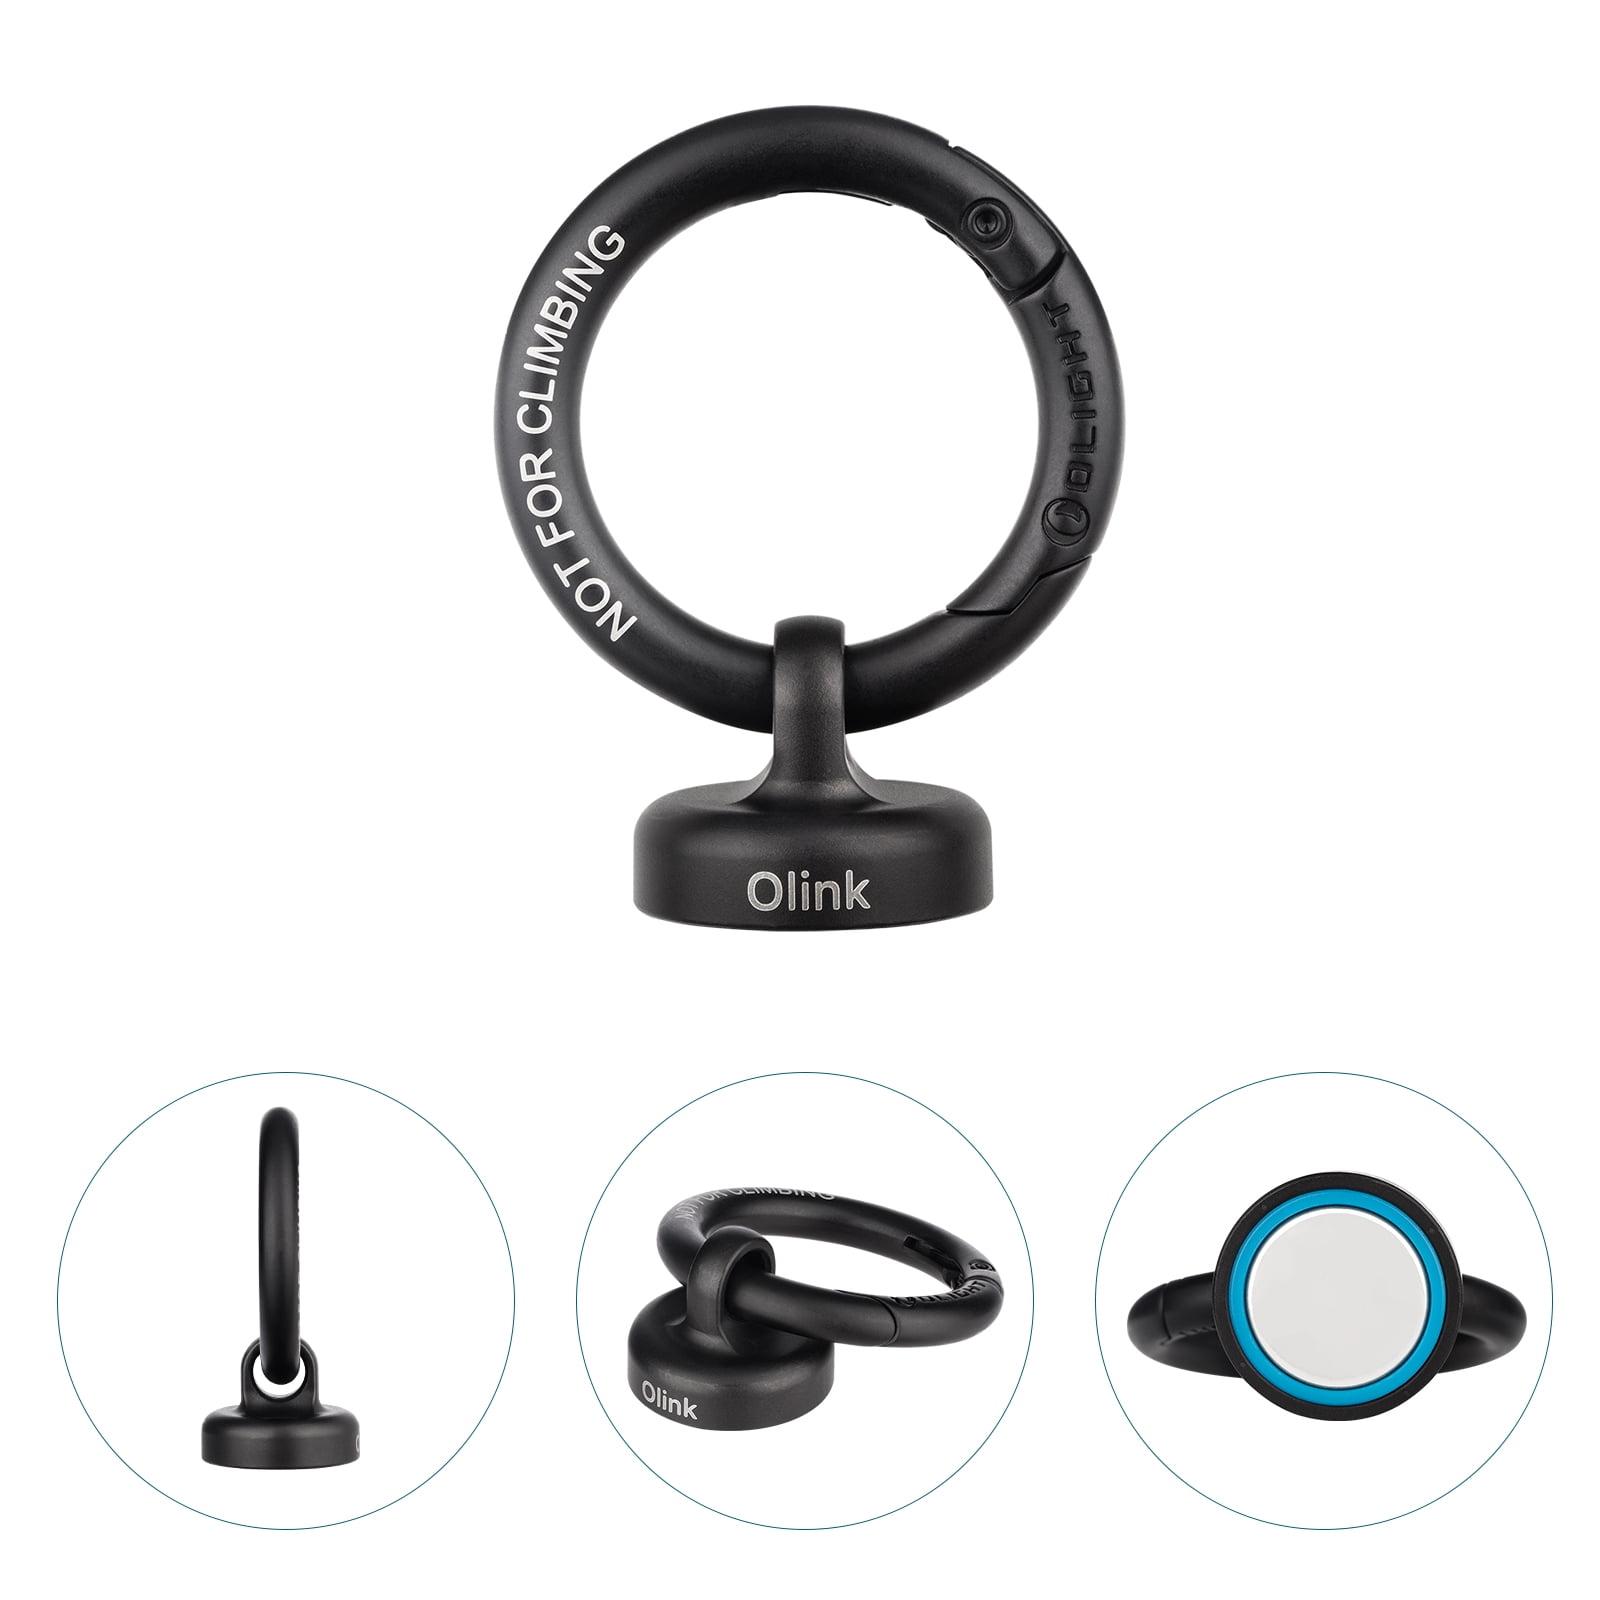 Stainless-Made Carabiner-Style Ring Obulb Series Black OLIGHT OLINK Portable Magnetic Hook Compatible with Olight Flashlights 